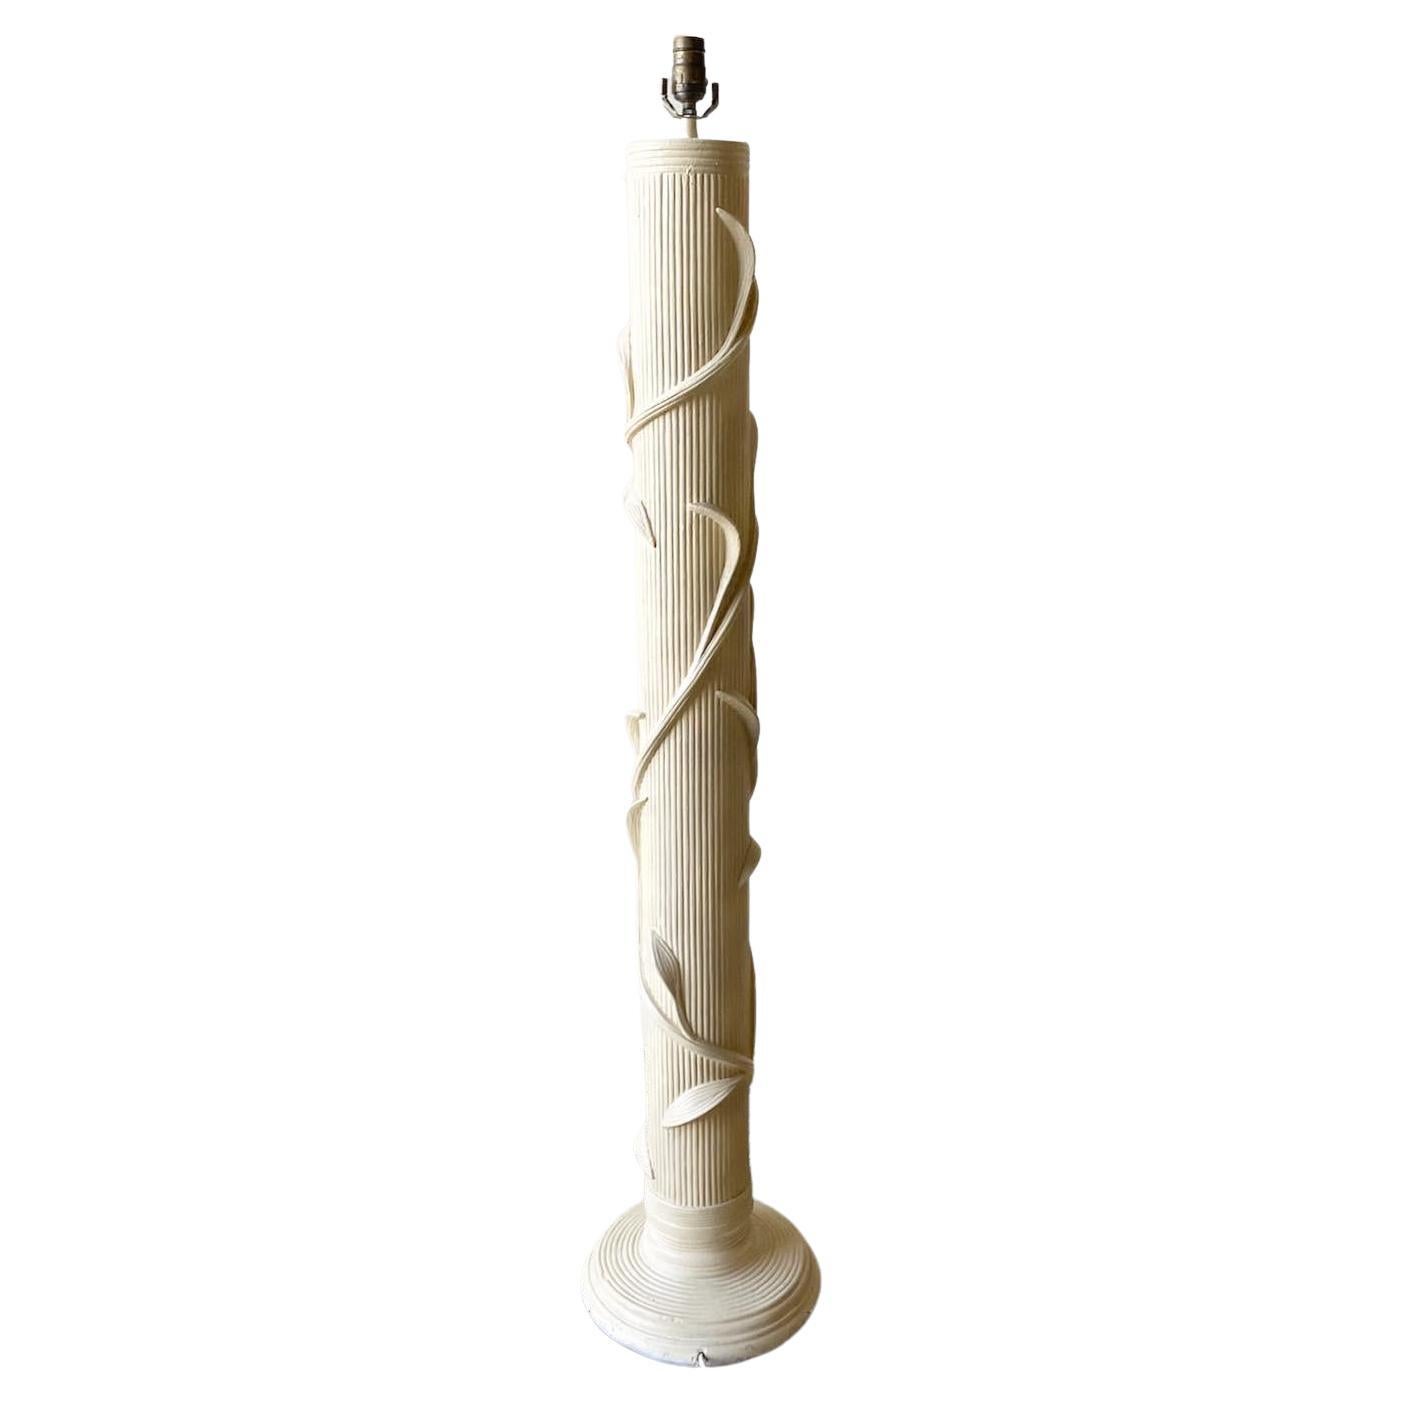 Boho Chic Faux Pencil Reed Ceramic Floor Lamp For Sale